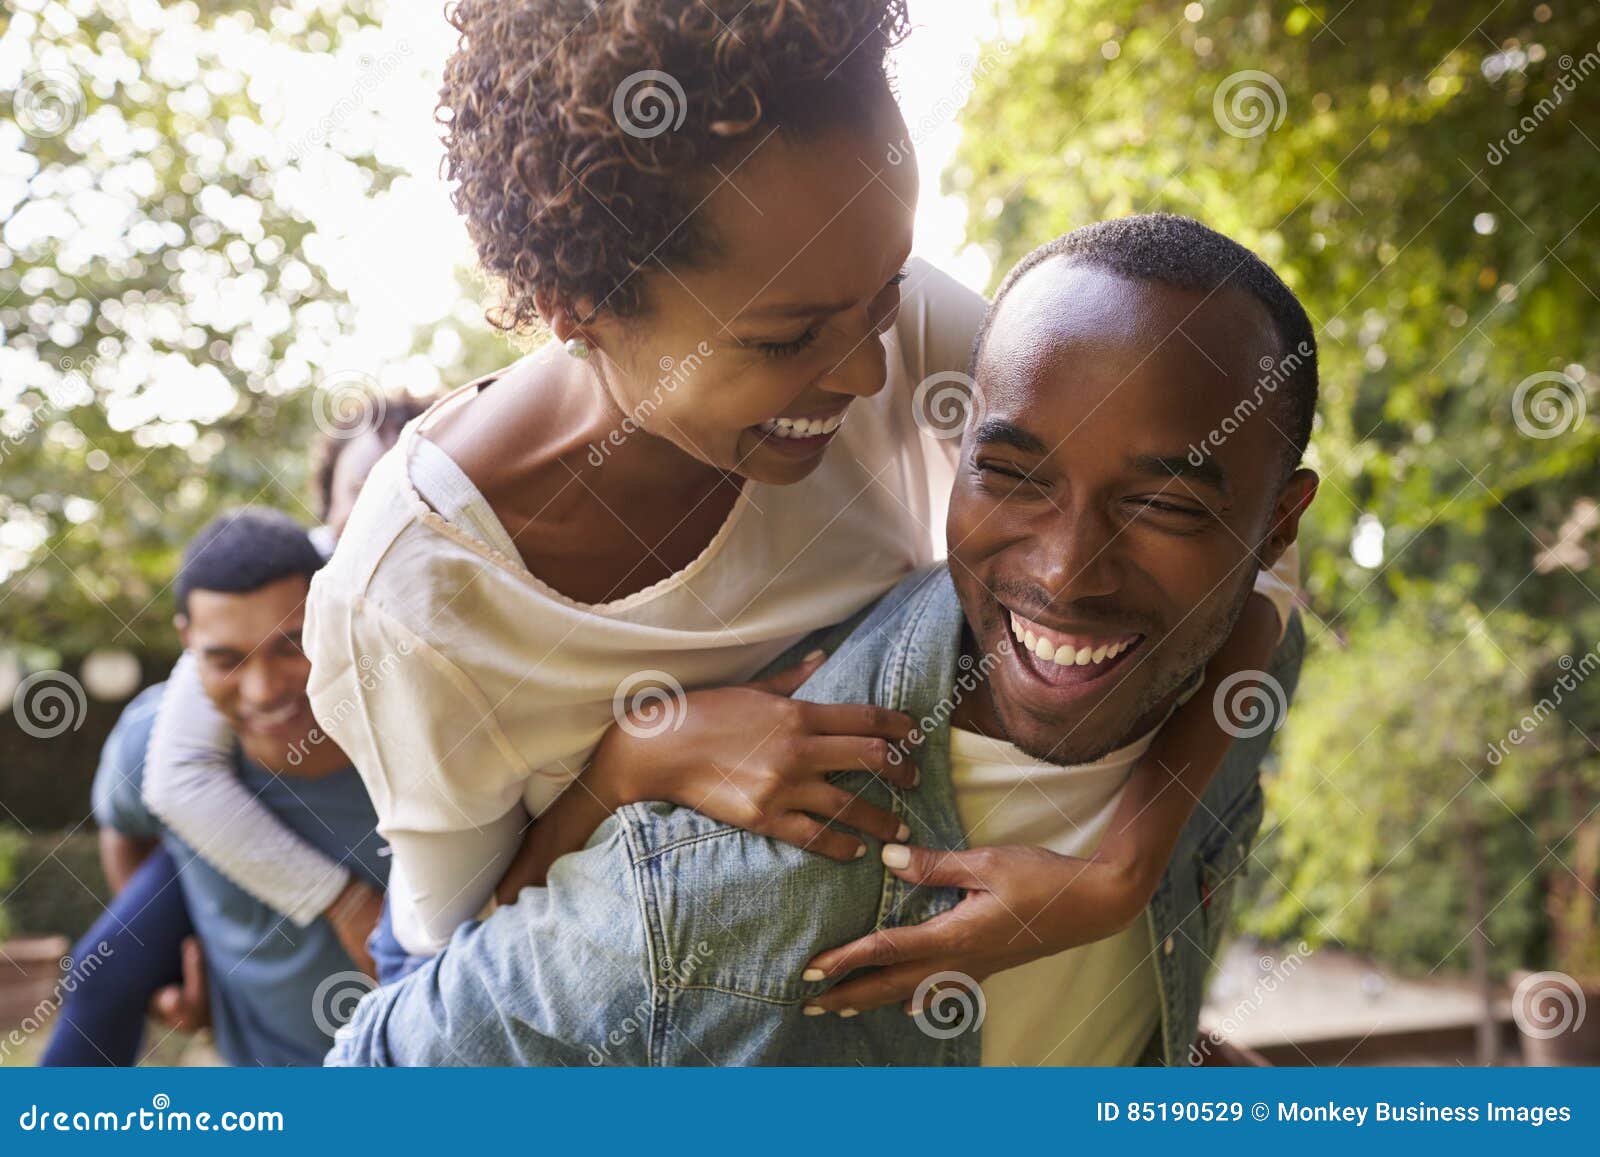 two adult black couples piggybacking looking at each other